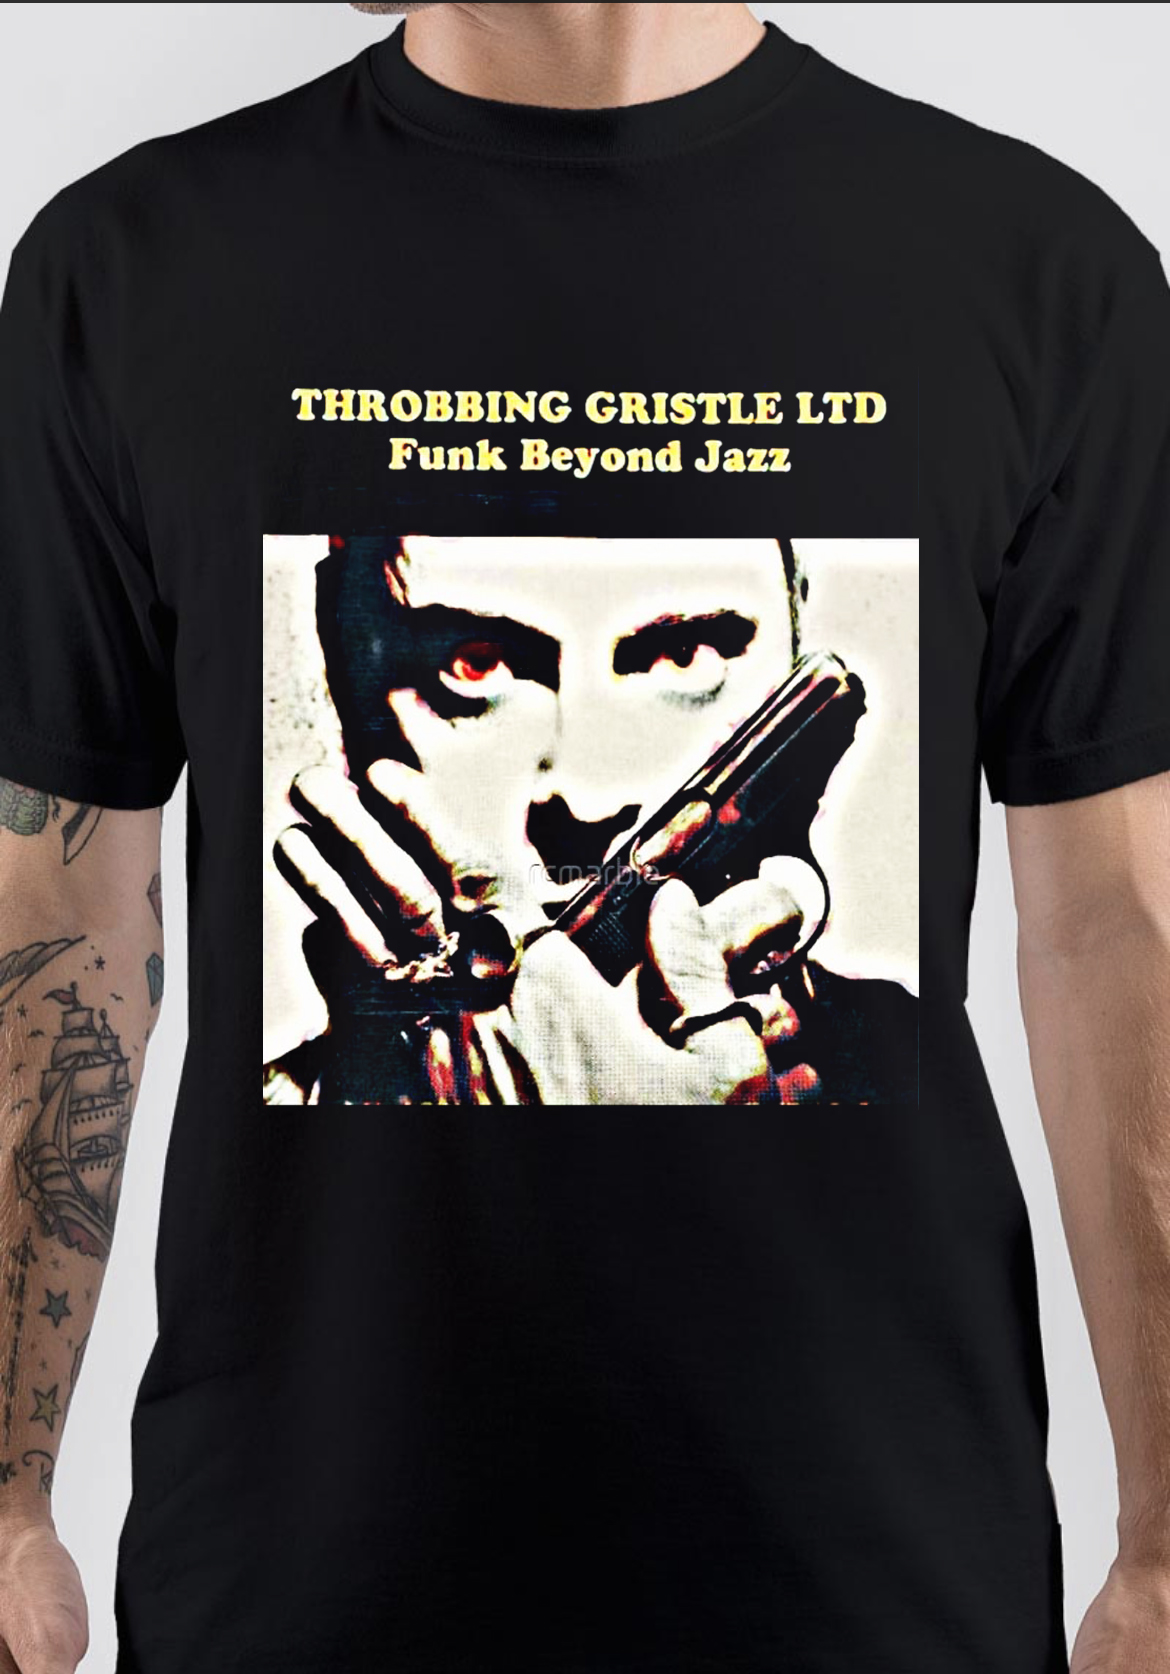 Throbbing Gristle T-Shirt And Merchandise